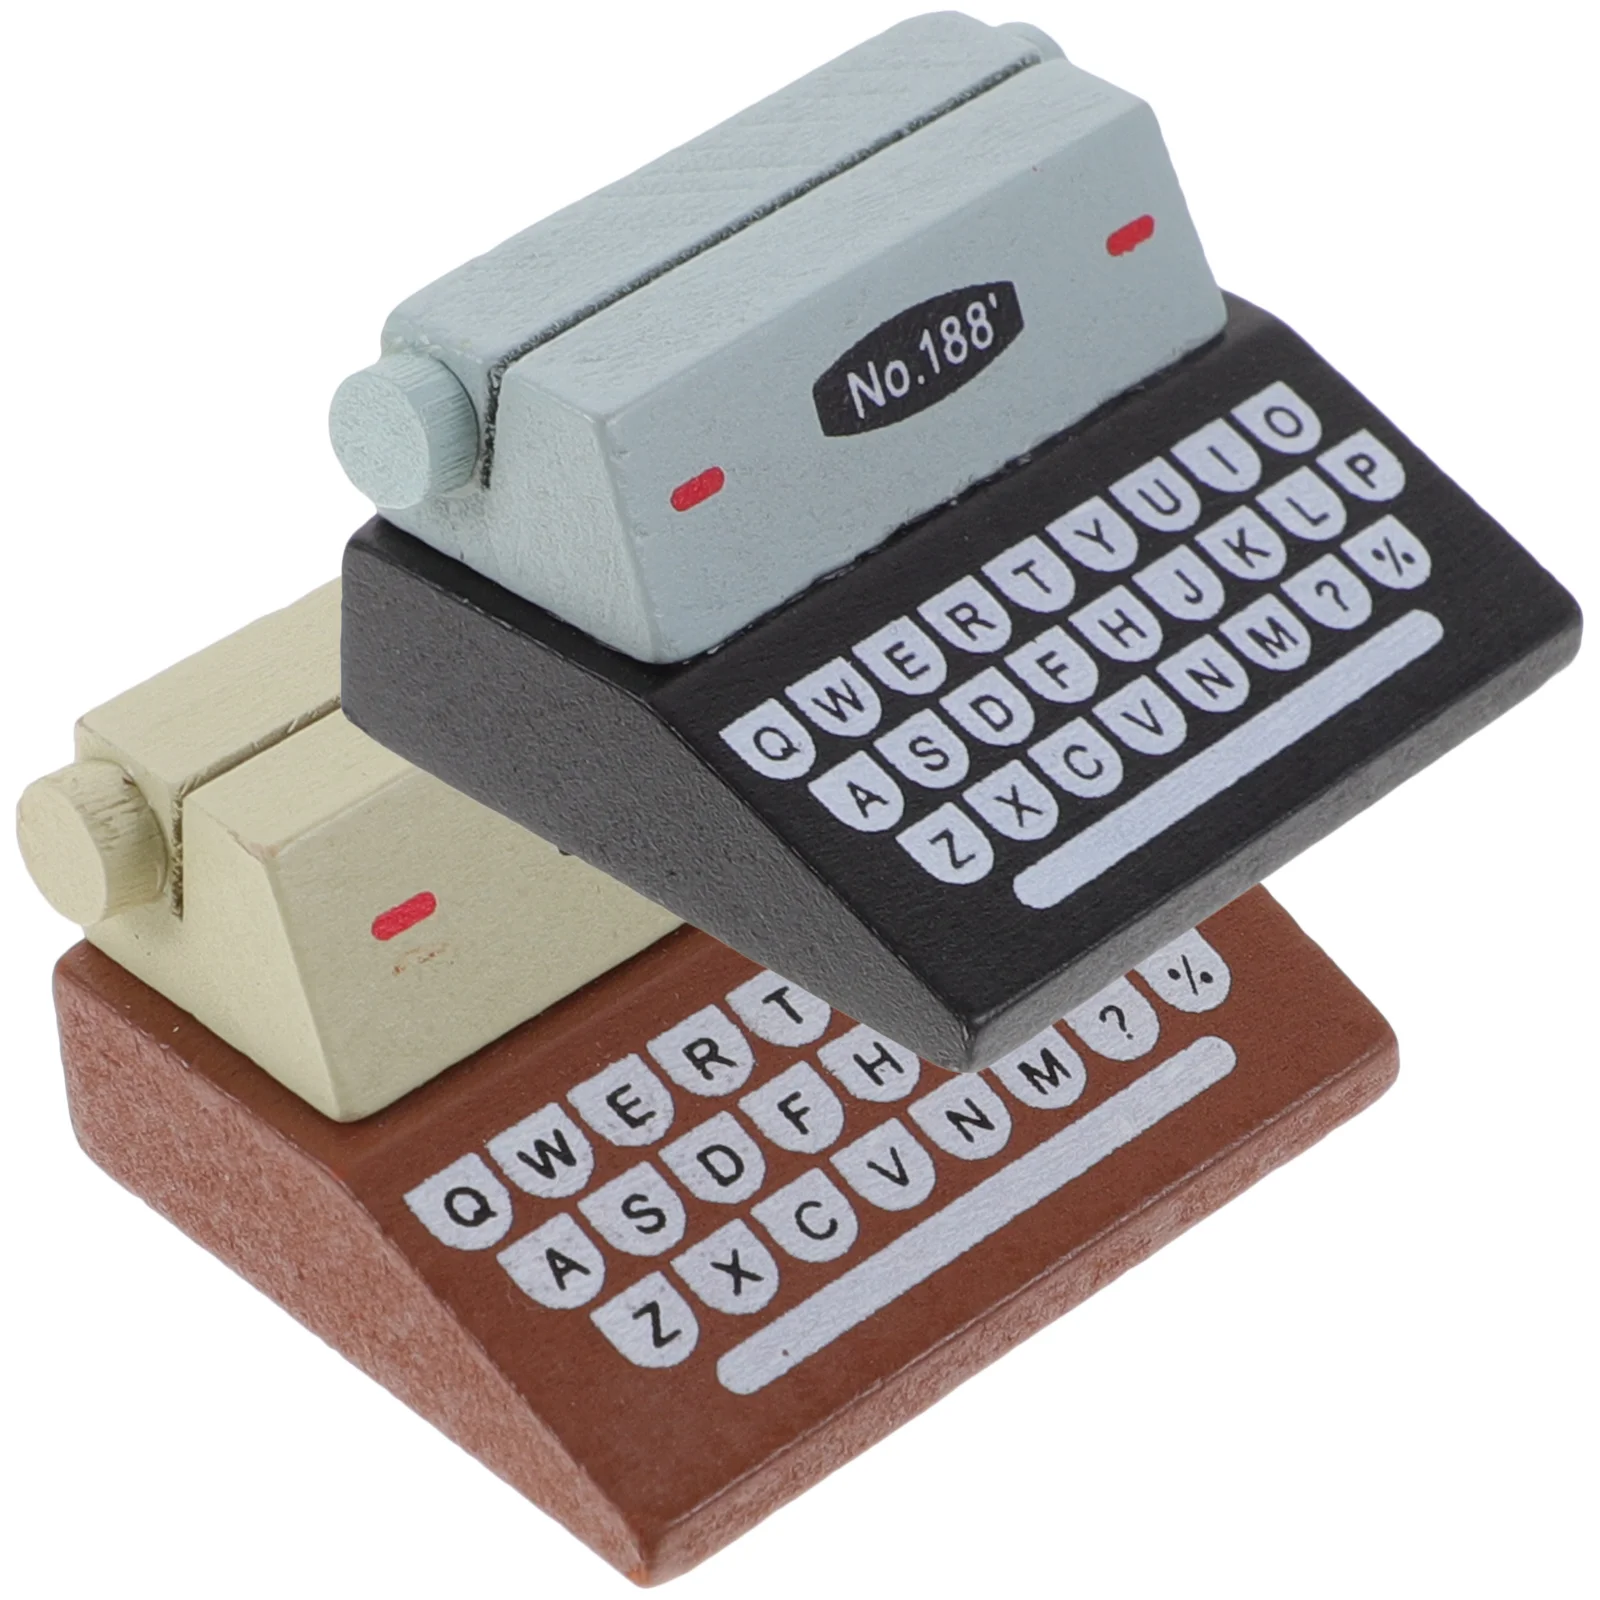 

2 Pcs Memo Pad Clip Wooden Typewriter Holder Photo Frame Party Message Clips Table Number